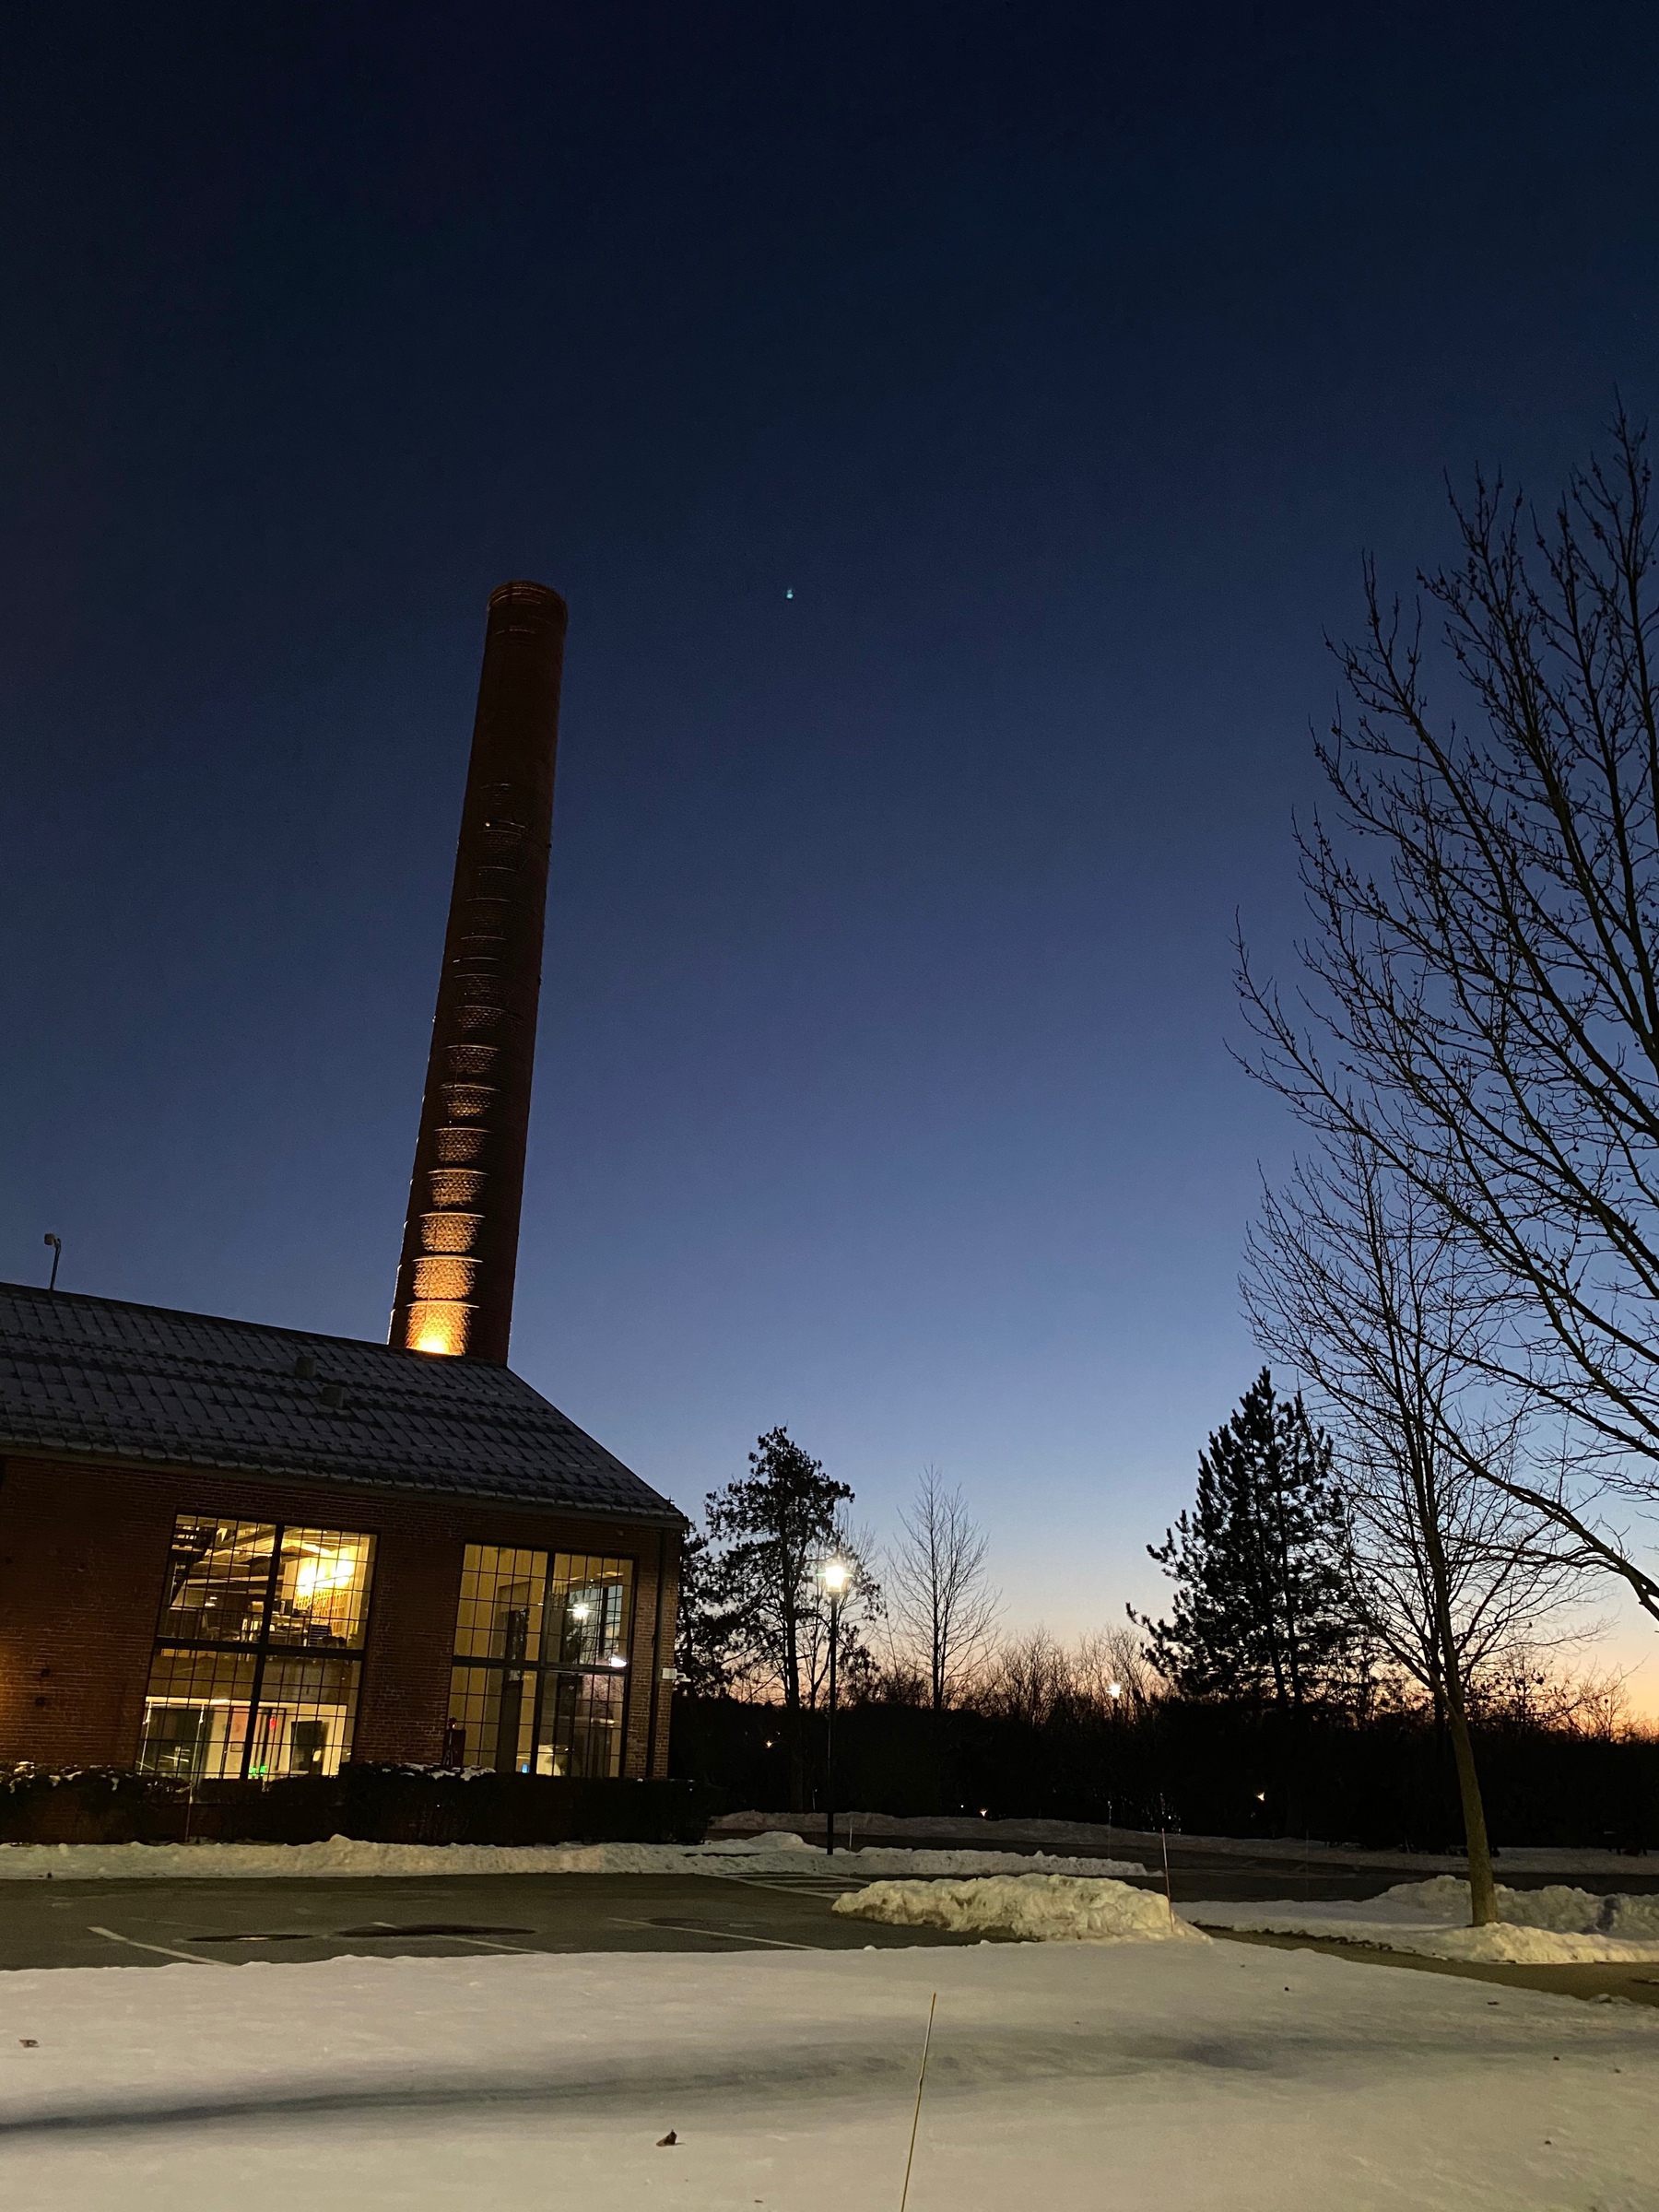 View shortly after sunset with the horizon still pink and Venus in the sky, trees and an illuminated building with a tall smokestack in the forground.